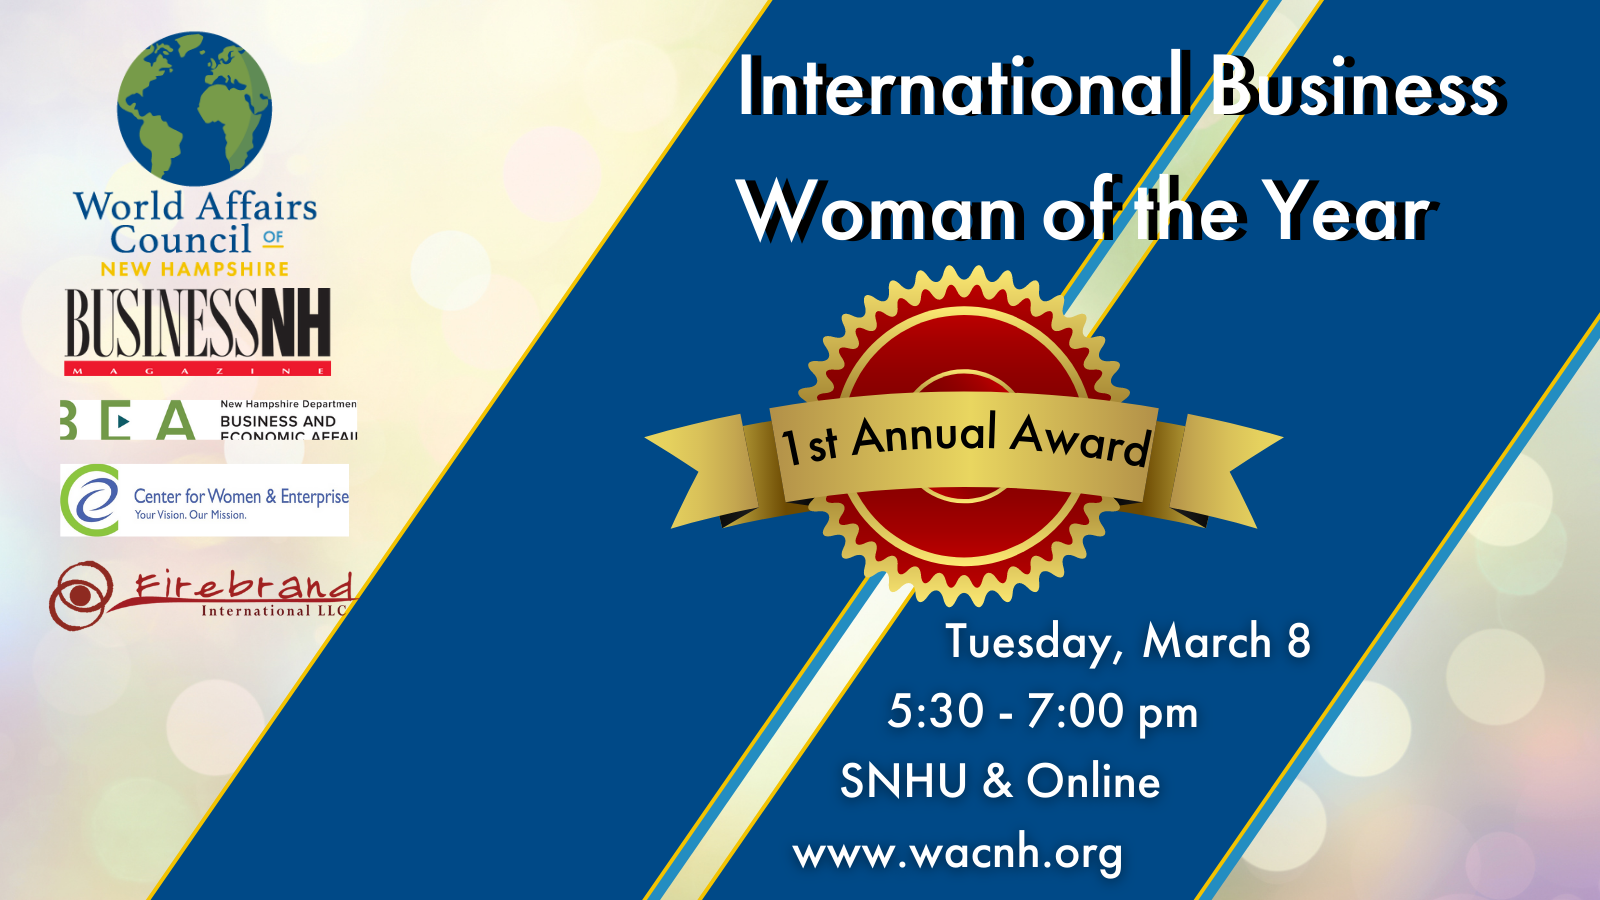 International Business Woman of the Year Award Launched